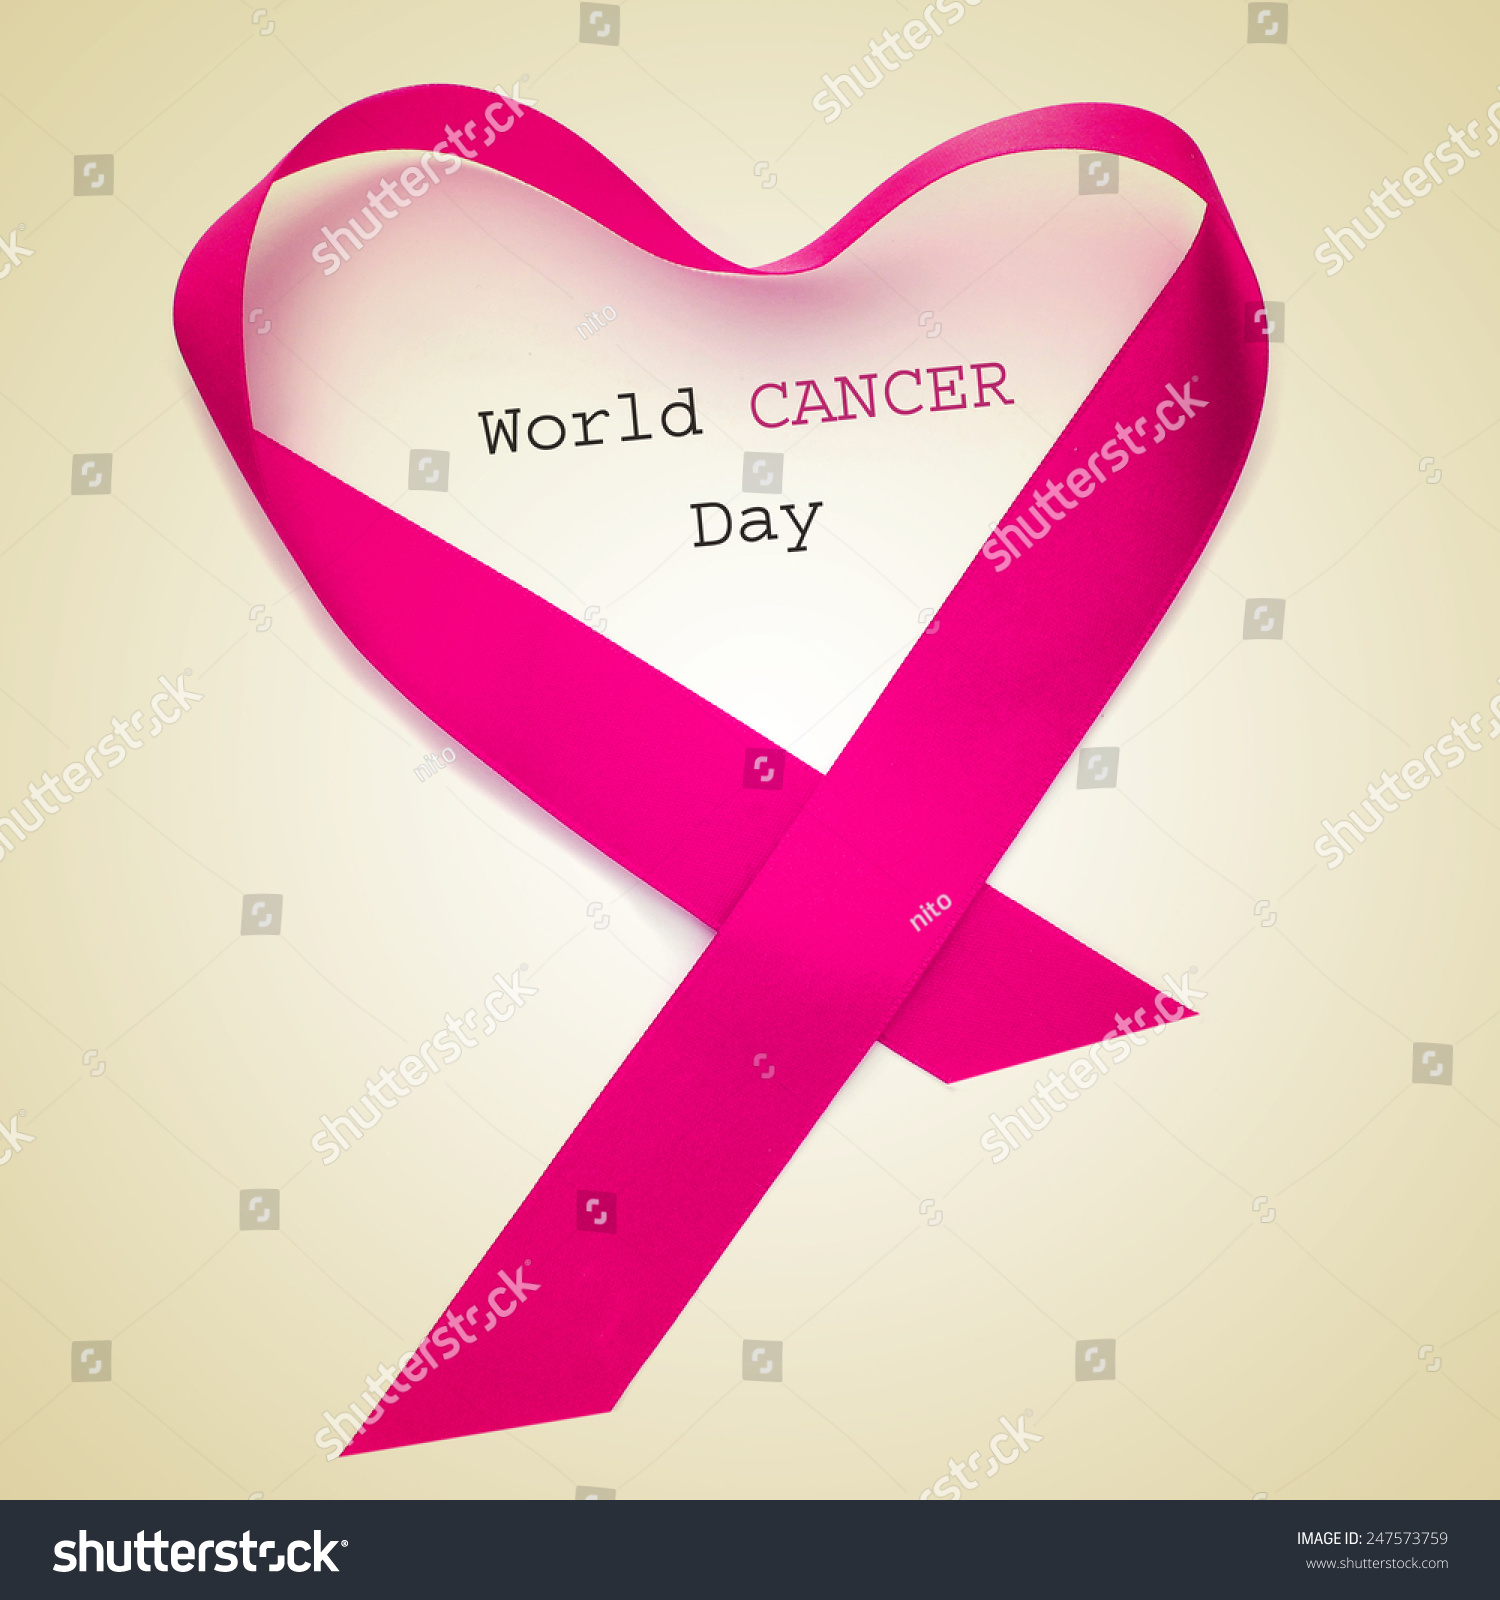 the text world cancer day and a pink ribbon forming a heart on a beige background #247573759